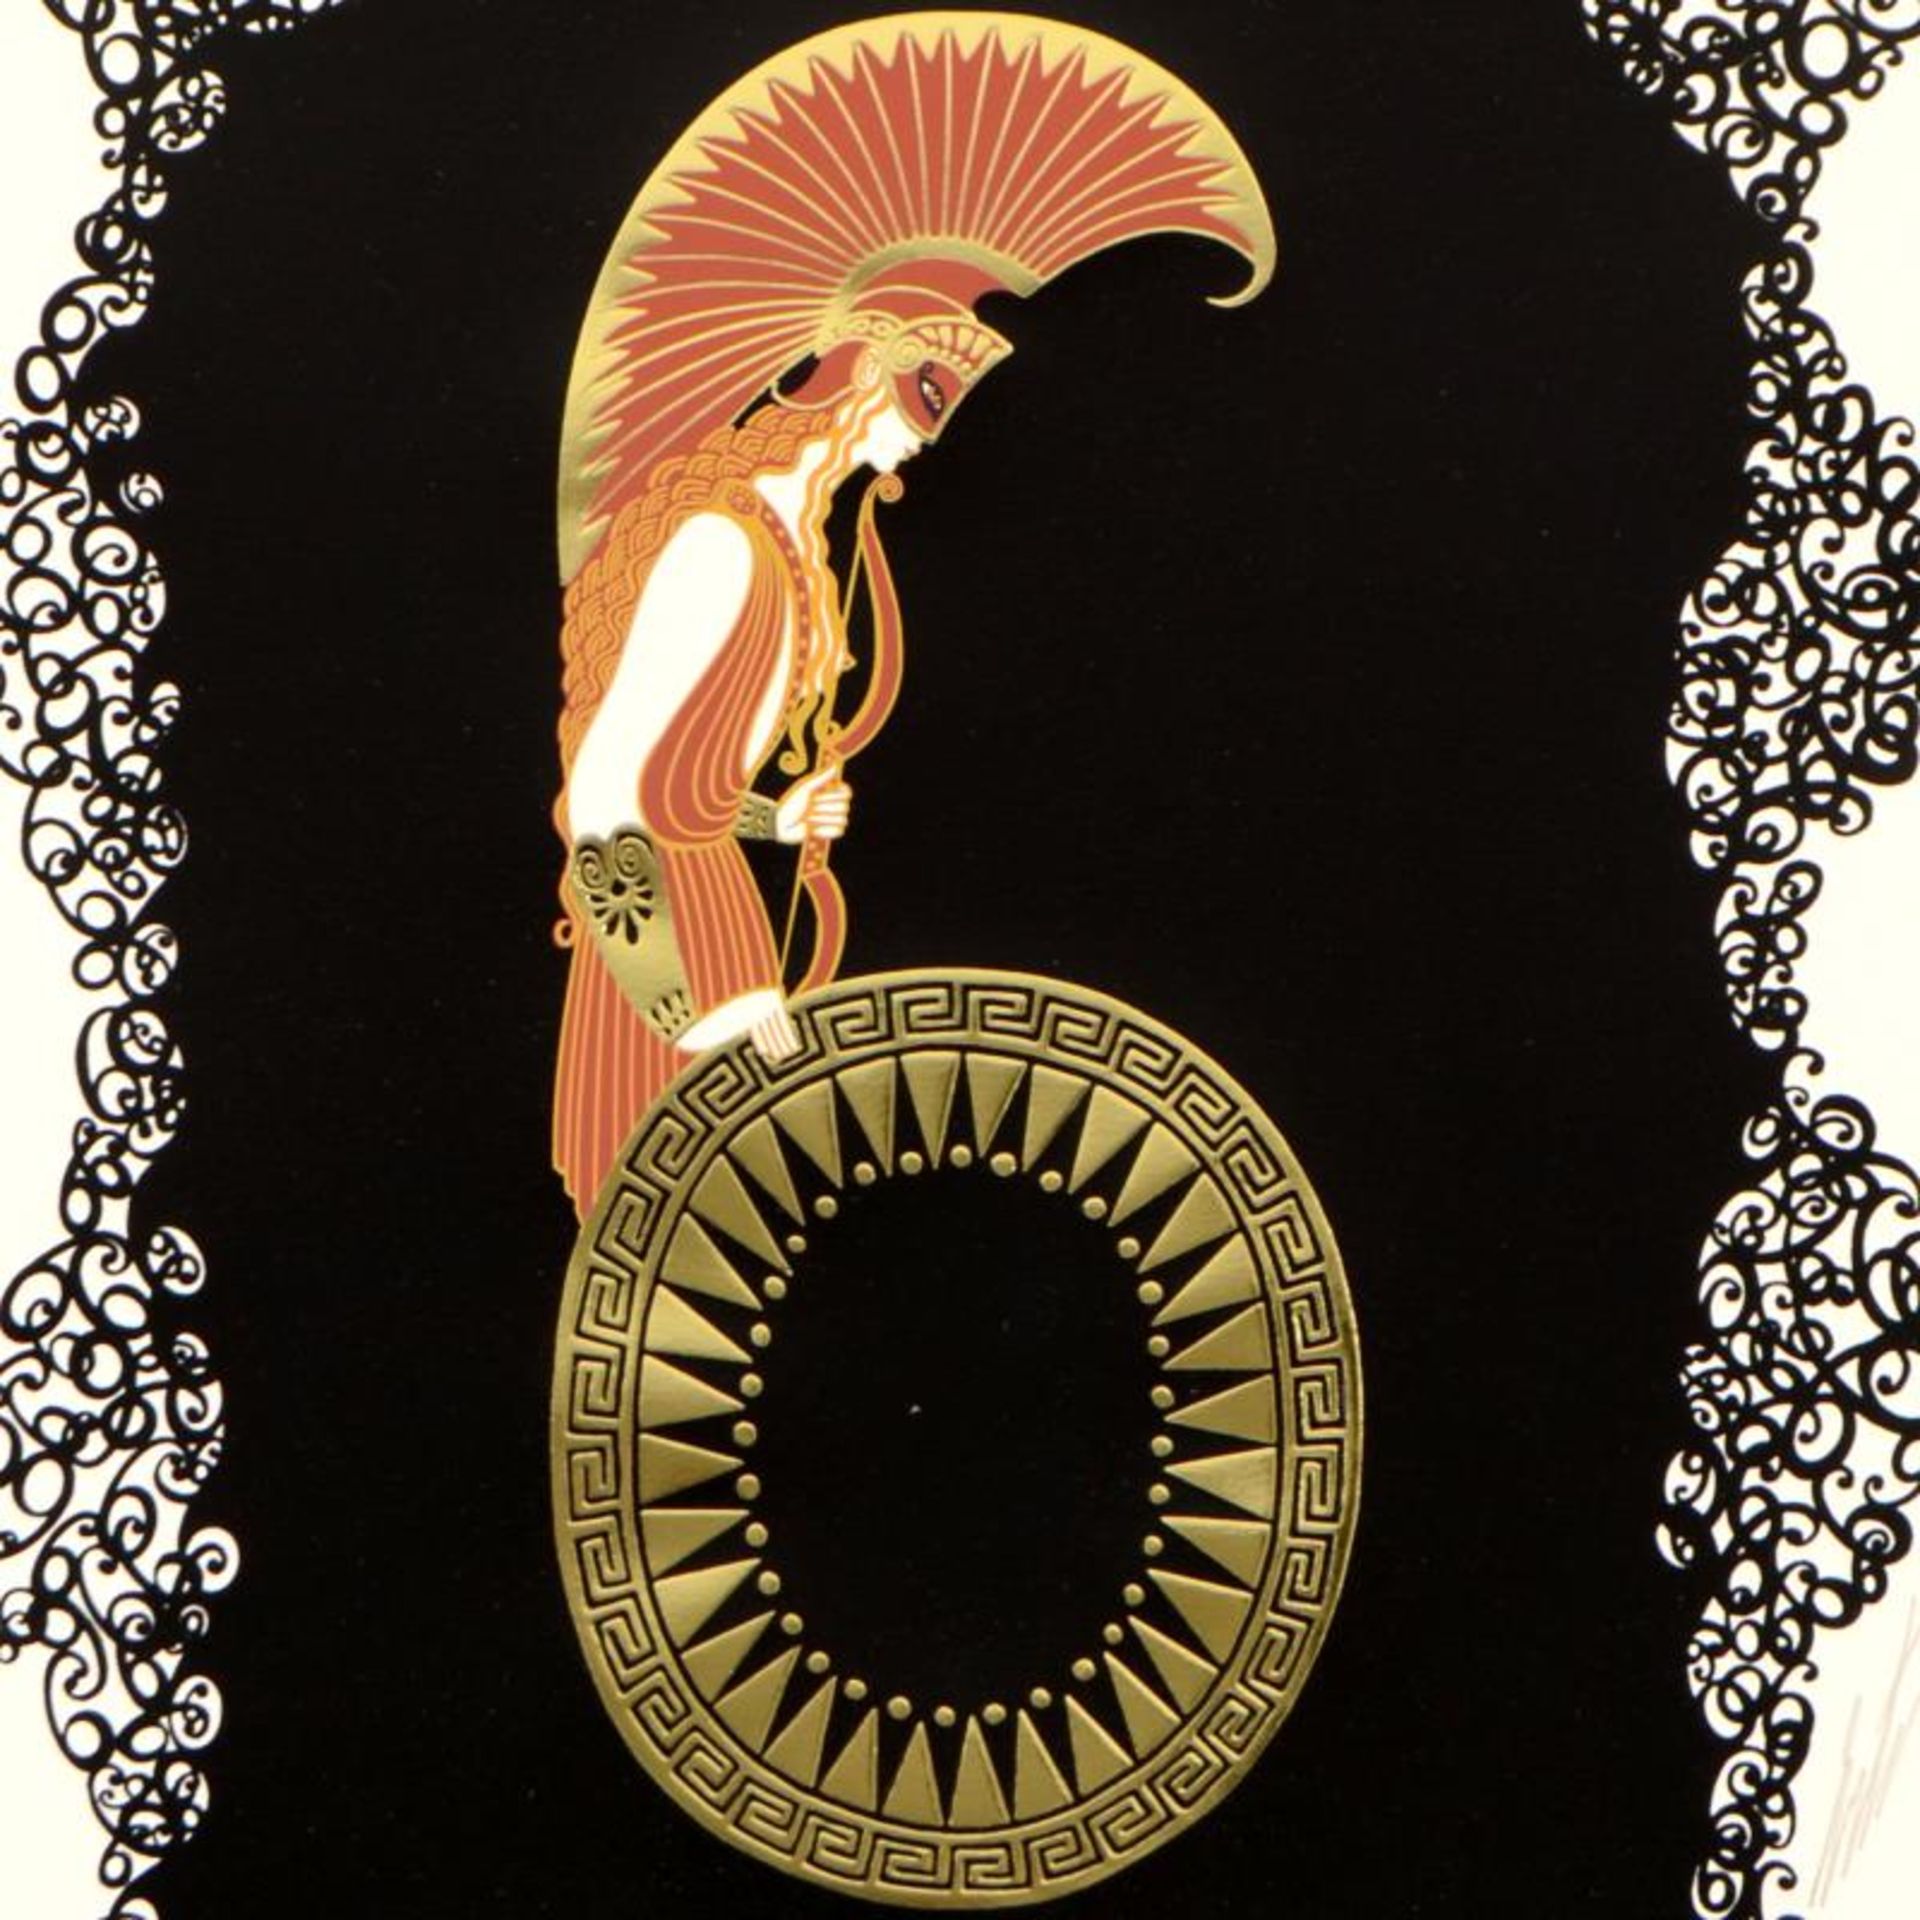 Numeral 6 by Erte (1892-1990) - Image 2 of 2